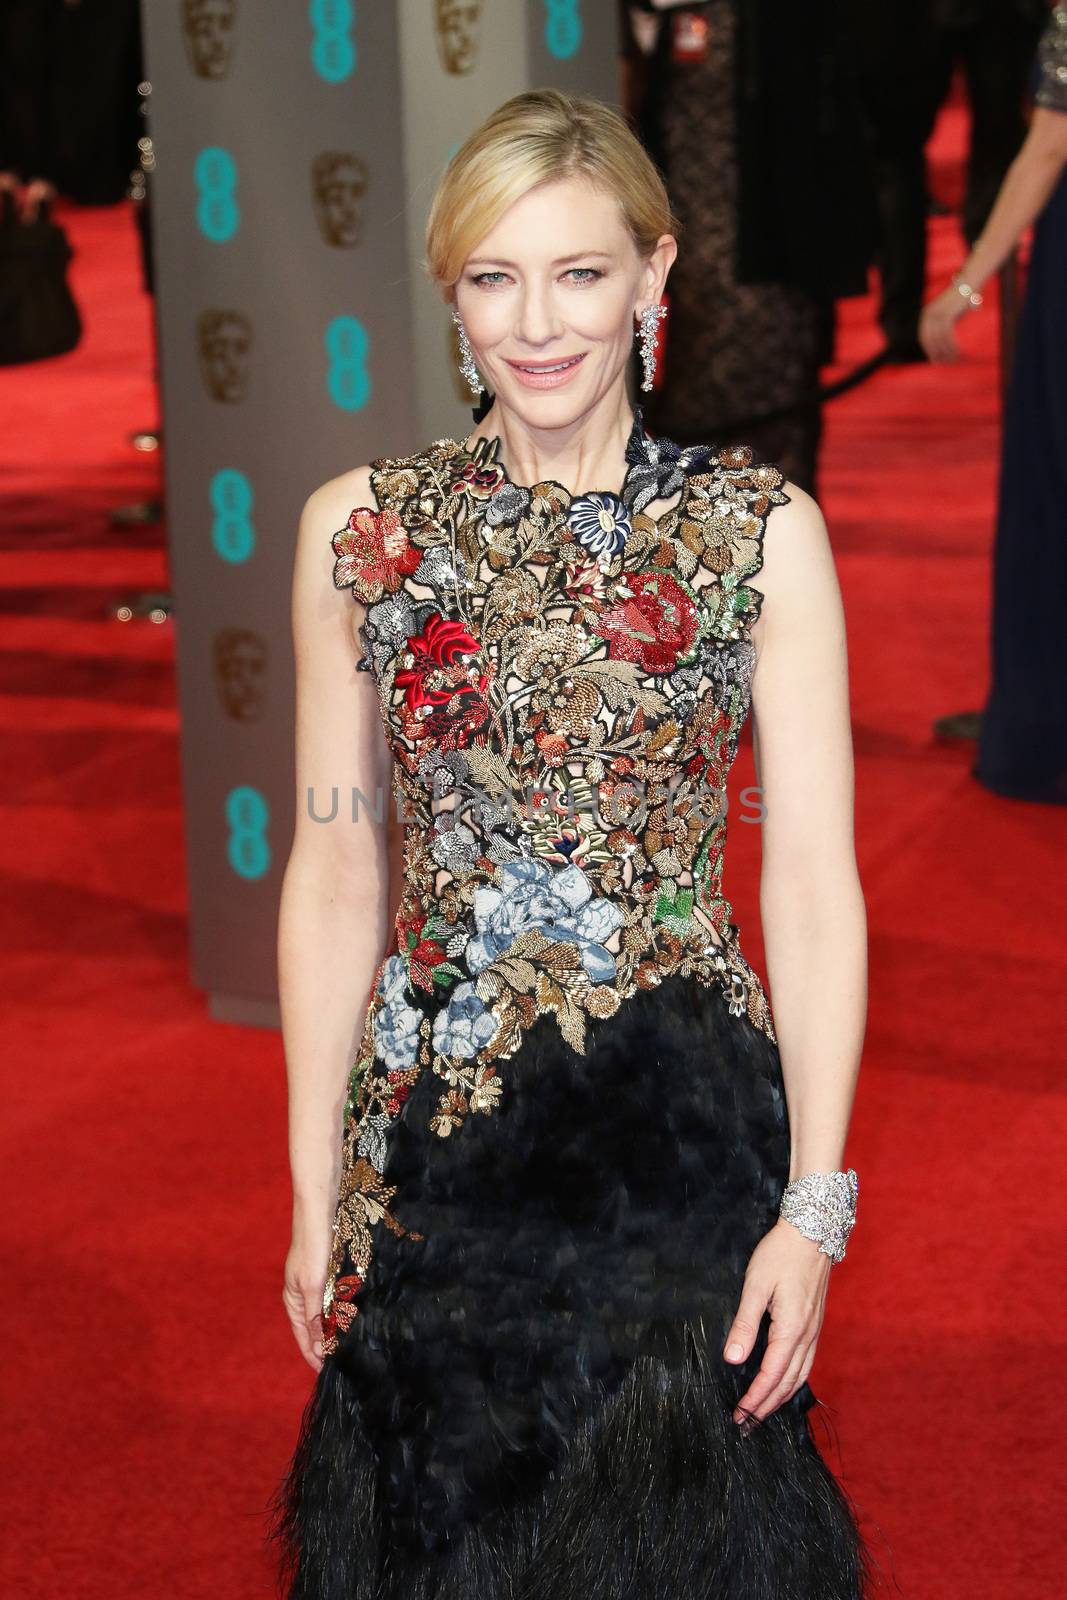 UK, London: Australian actress Cate Blanchett poses on the red Carpet at the EE British Academy Film Awards, BAFTA Awards, at the Royal Opera House in London, England, on 14 February 2016.